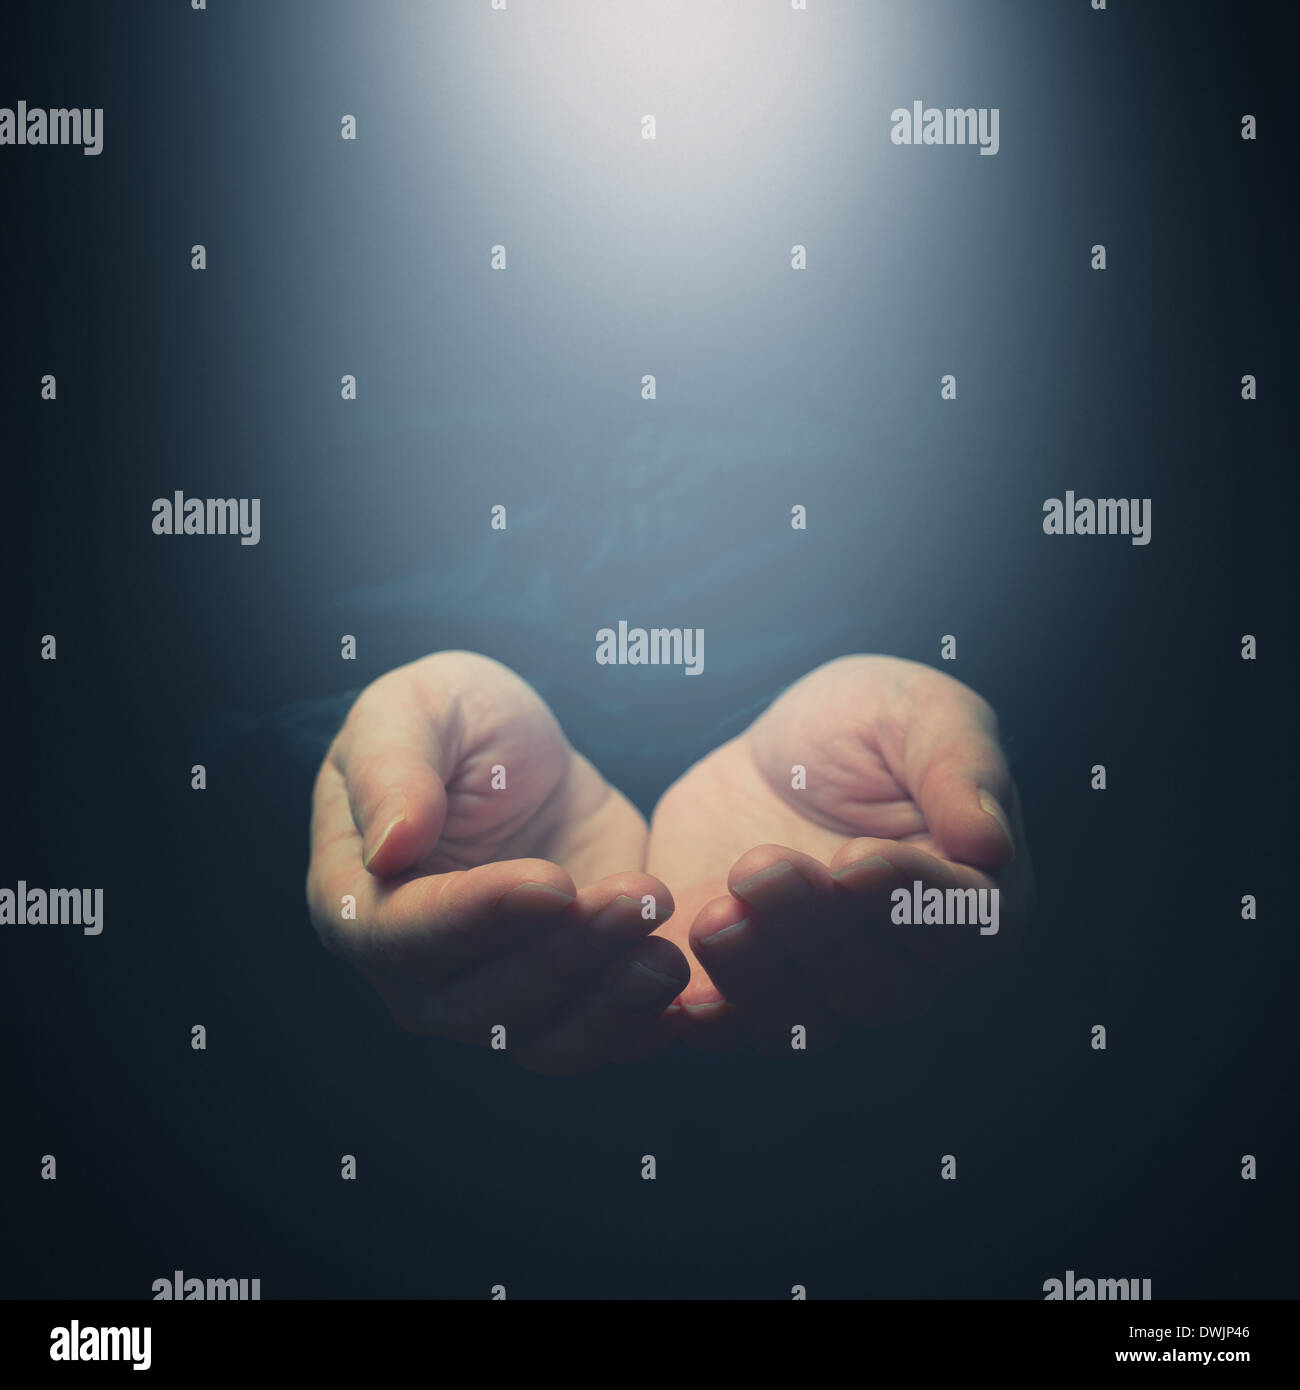 Female hands opening to light. Holding, giving, showing concept. Selective focus on fingers. Stock Photo